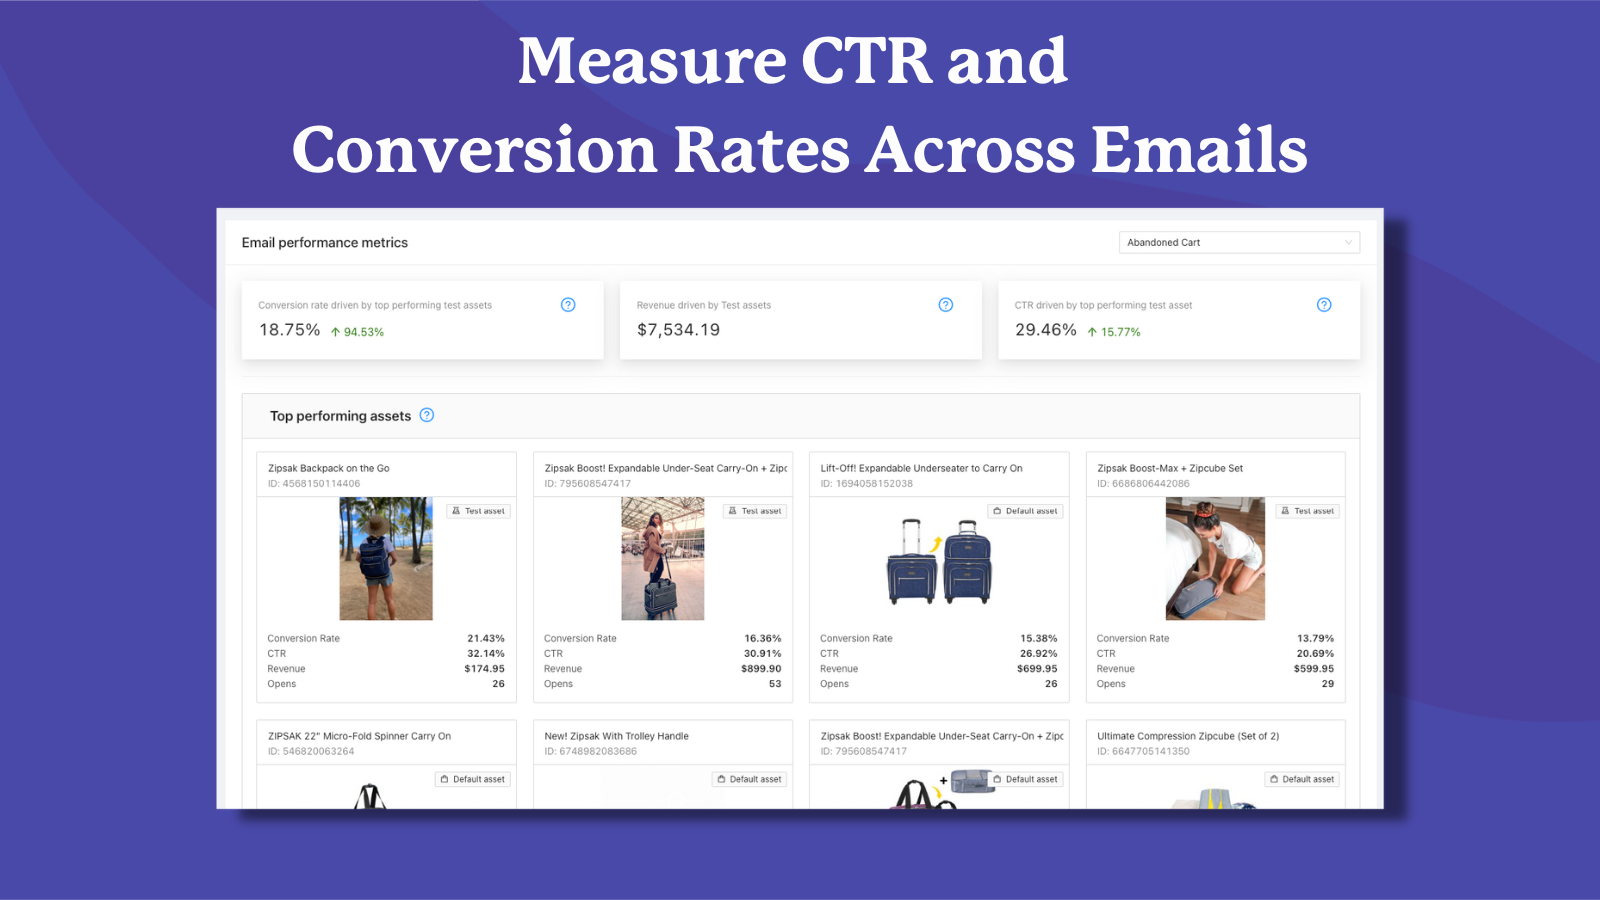 Measure CTR and conversion rates across emails